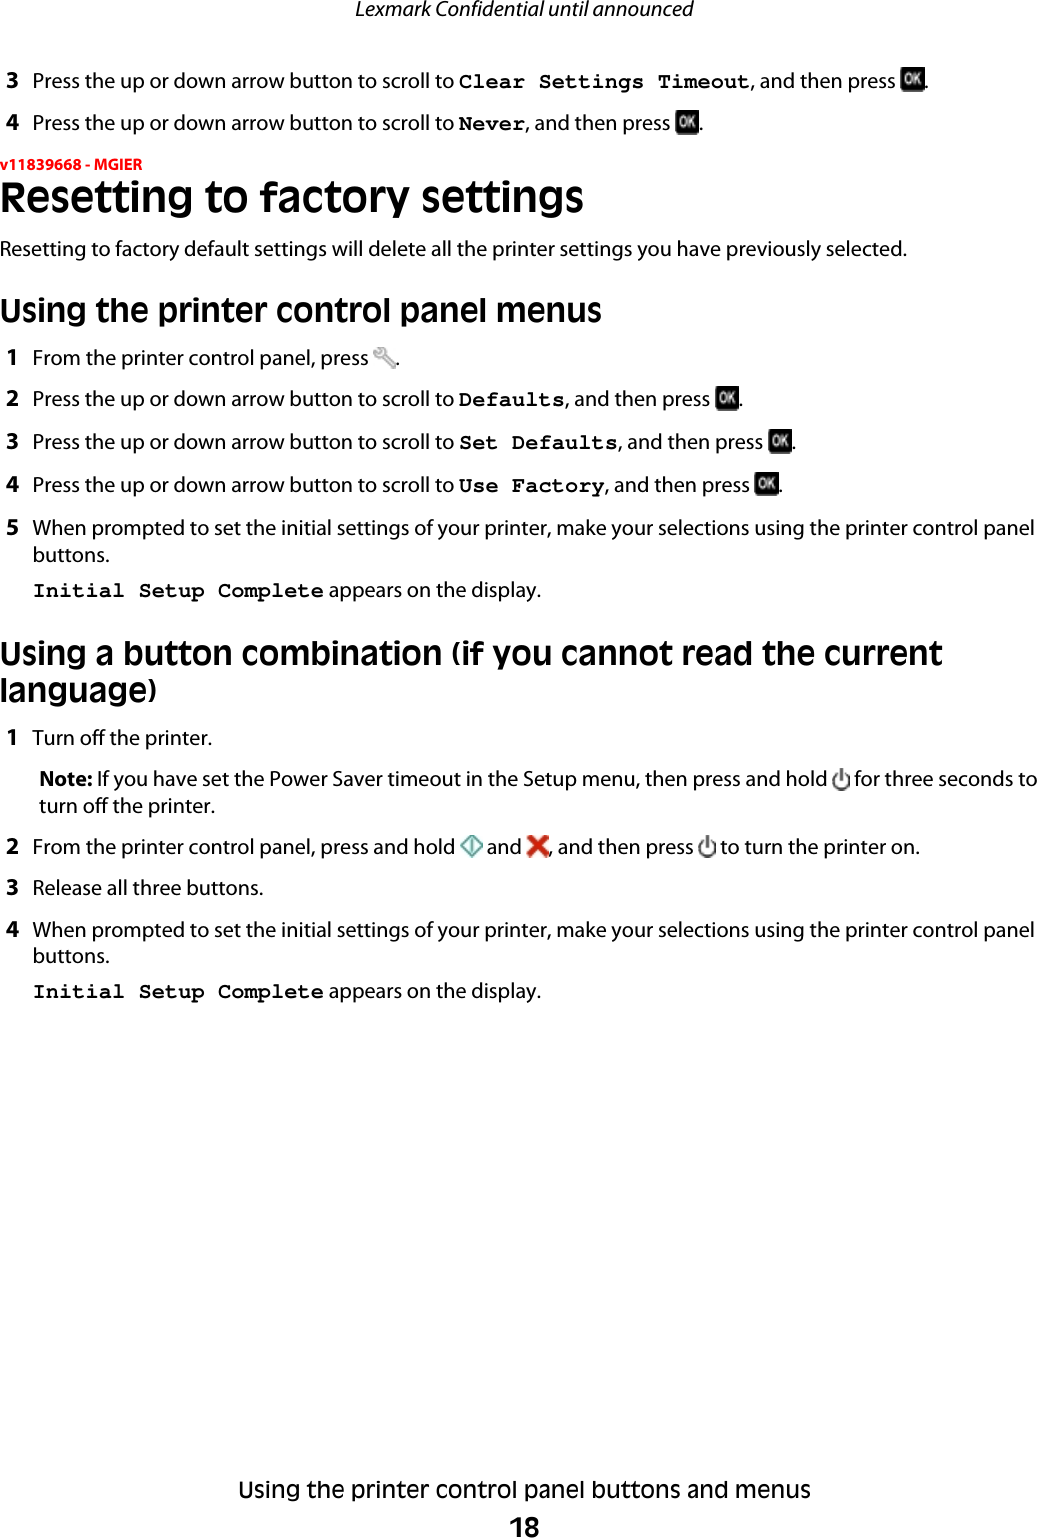 3Press the up or down arrow button to scroll to Clear Settings Timeout, and then press  .4Press the up or down arrow button to scroll to Never, and then press  .v11839668 - MGIERResetting to factory settingsResetting to factory default settings will delete all the printer settings you have previously selected.Using the printer control panel menus1From the printer control panel, press  .2Press the up or down arrow button to scroll to Defaults, and then press  .3Press the up or down arrow button to scroll to Set Defaults, and then press  .4Press the up or down arrow button to scroll to Use Factory, and then press  .5When prompted to set the initial settings of your printer, make your selections using the printer control panelbuttons.Initial Setup Complete appears on the display.Using a button combination (if you cannot read the currentlanguage)1Turn off the printer.Note: If you have set the Power Saver timeout in the Setup menu, then press and hold   for three seconds toturn off the printer.2From the printer control panel, press and hold   and  , and then press   to turn the printer on.3Release all three buttons.4When prompted to set the initial settings of your printer, make your selections using the printer control panelbuttons.Initial Setup Complete appears on the display.Lexmark Confidential until announcedUsing the printer control panel buttons and menus18